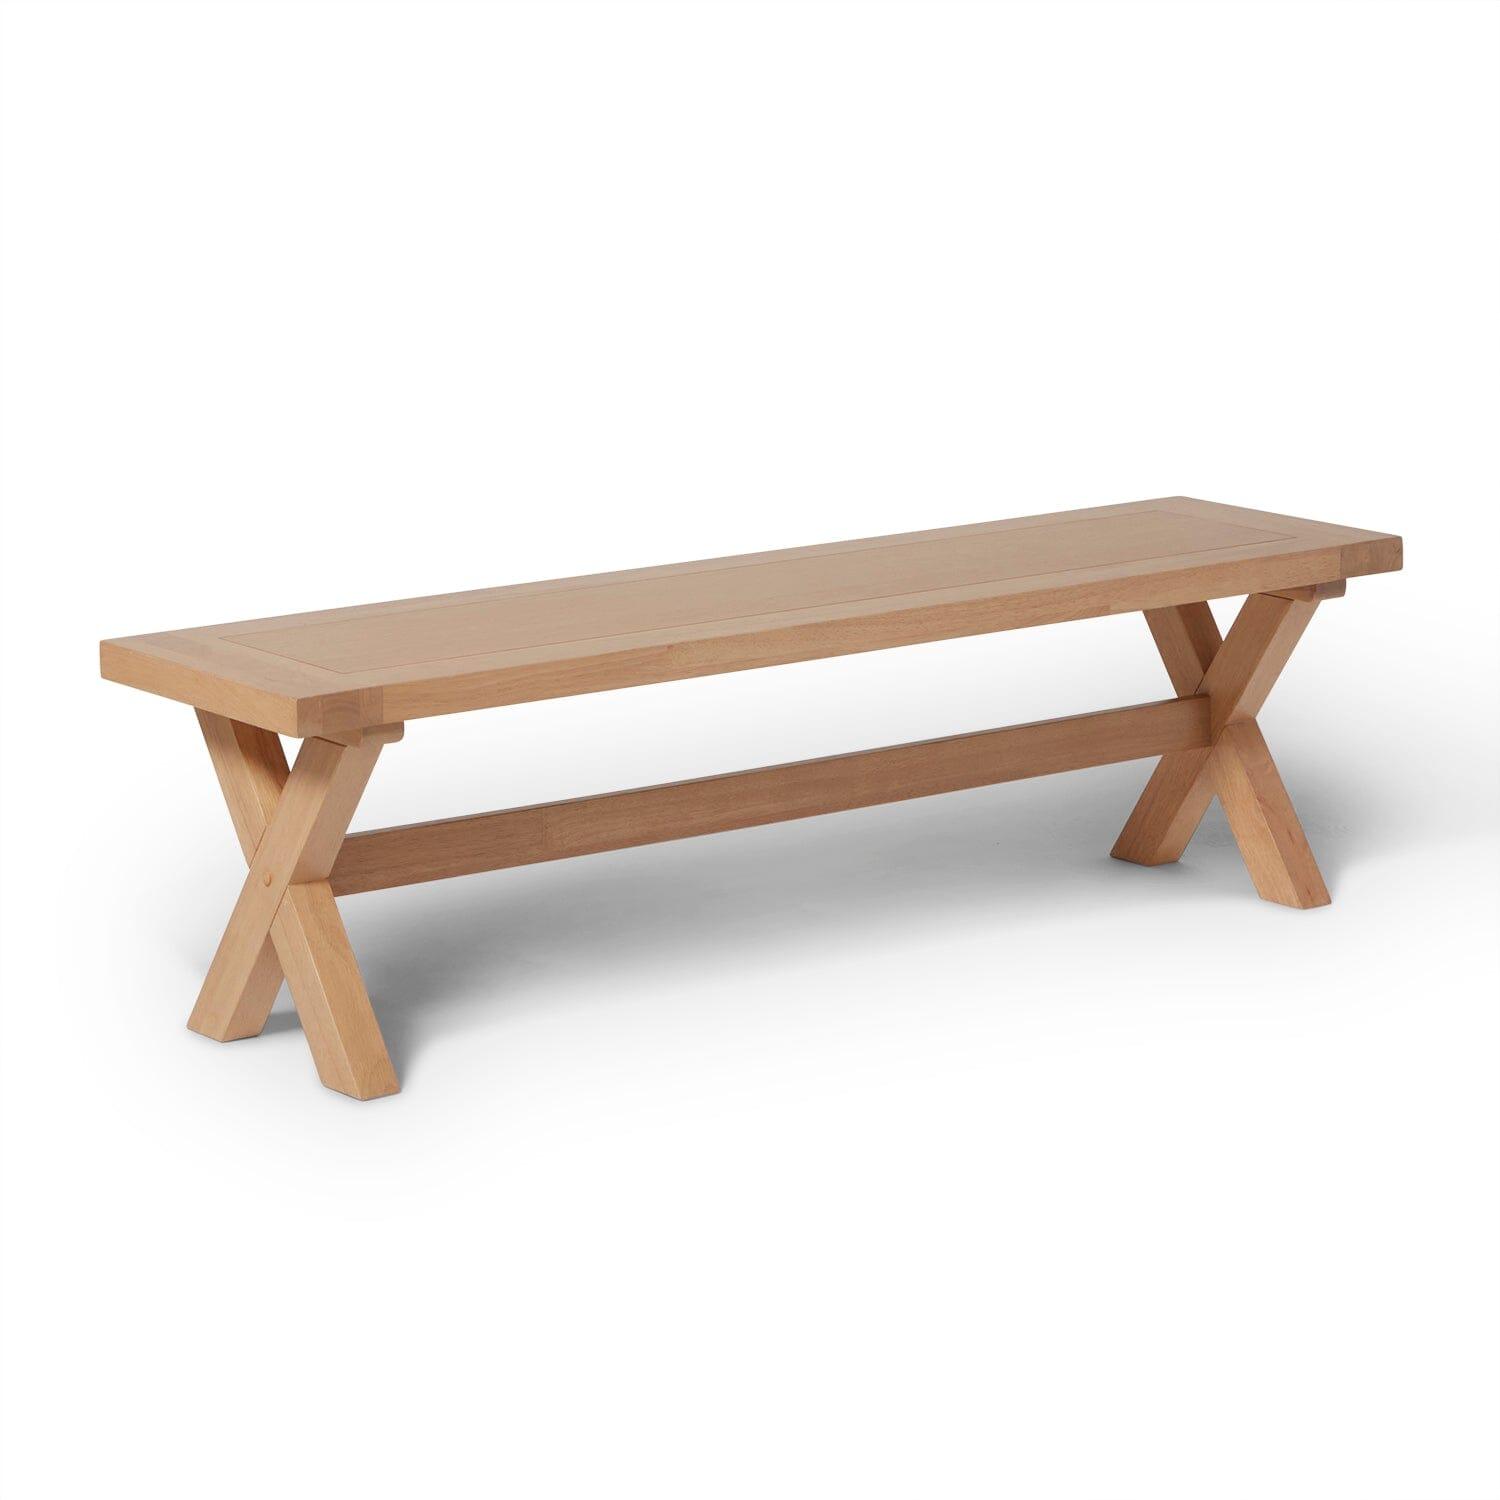 Charlotte Pale Oak Dining Table with 2 Dining Benches - Laura James